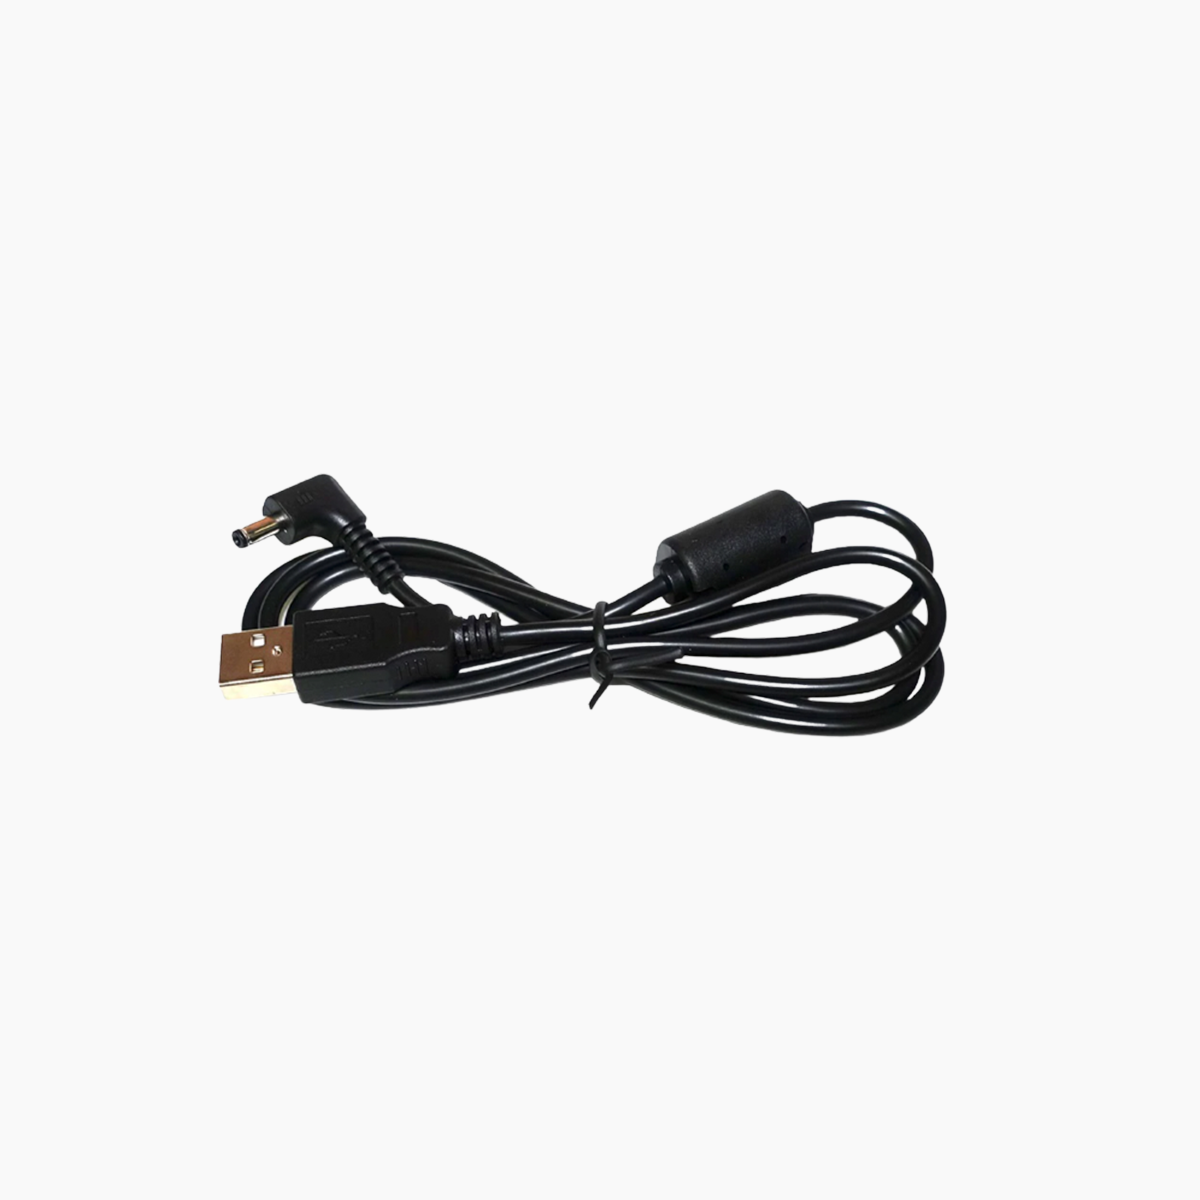 USB-to-DC Jack cable for PhotoSpring 10.1" and PhotoSpring 8